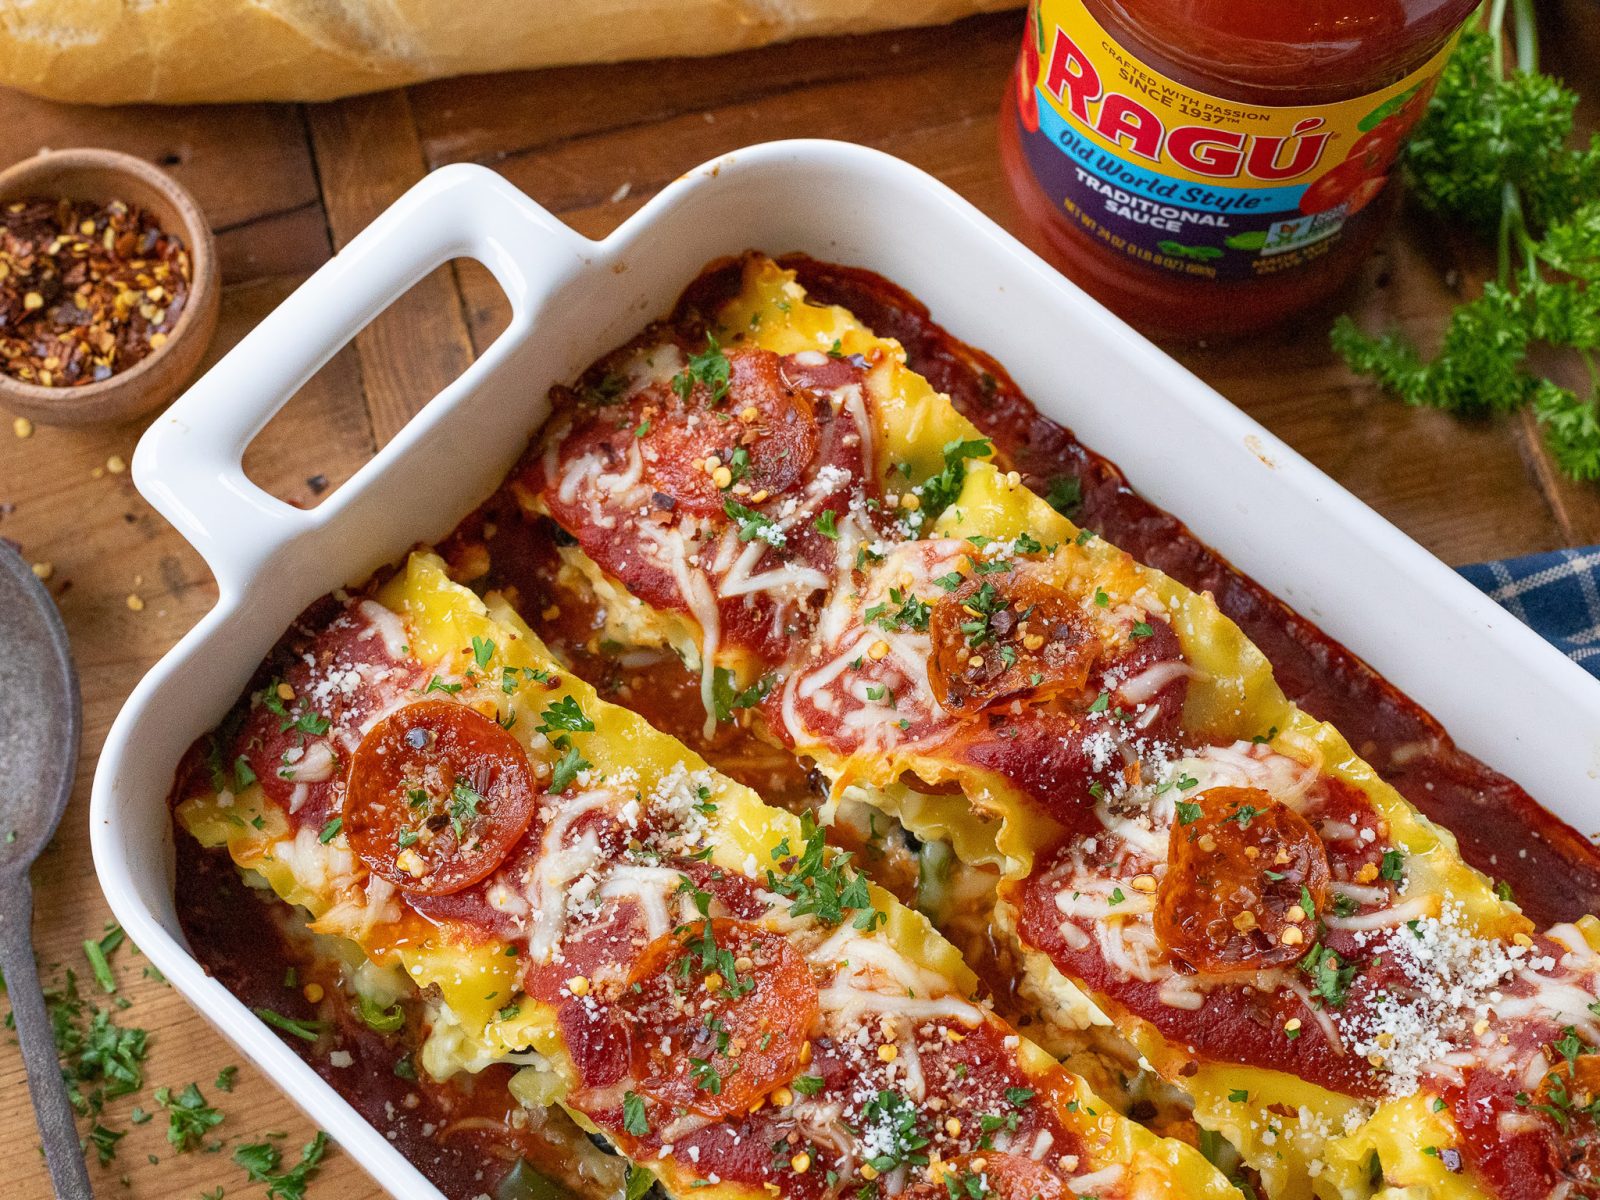 Loaded Pizza Lasagna Rollatini – Perfect Meal For The BOGO Sale On RAGÚ® Sauce At Publix!